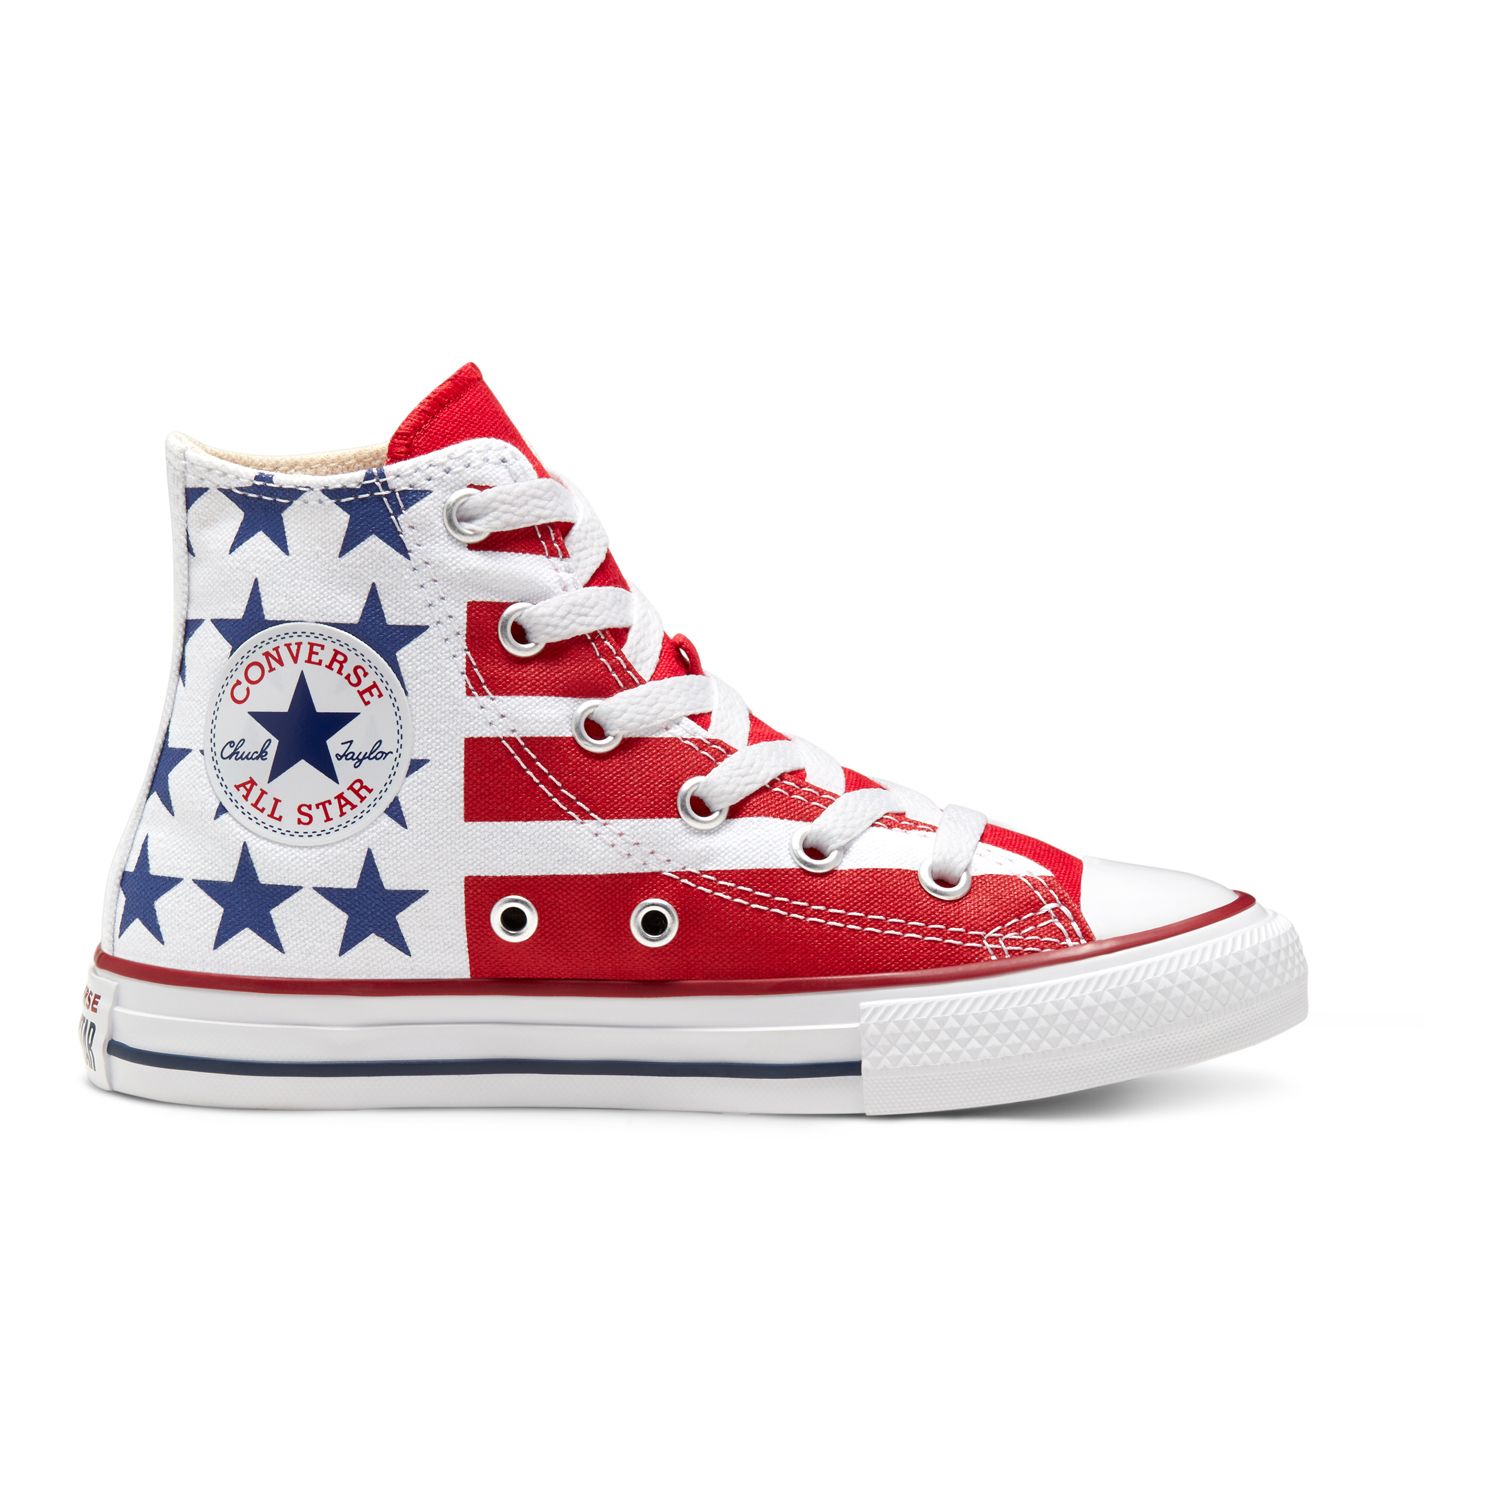 converse all star kid shoes